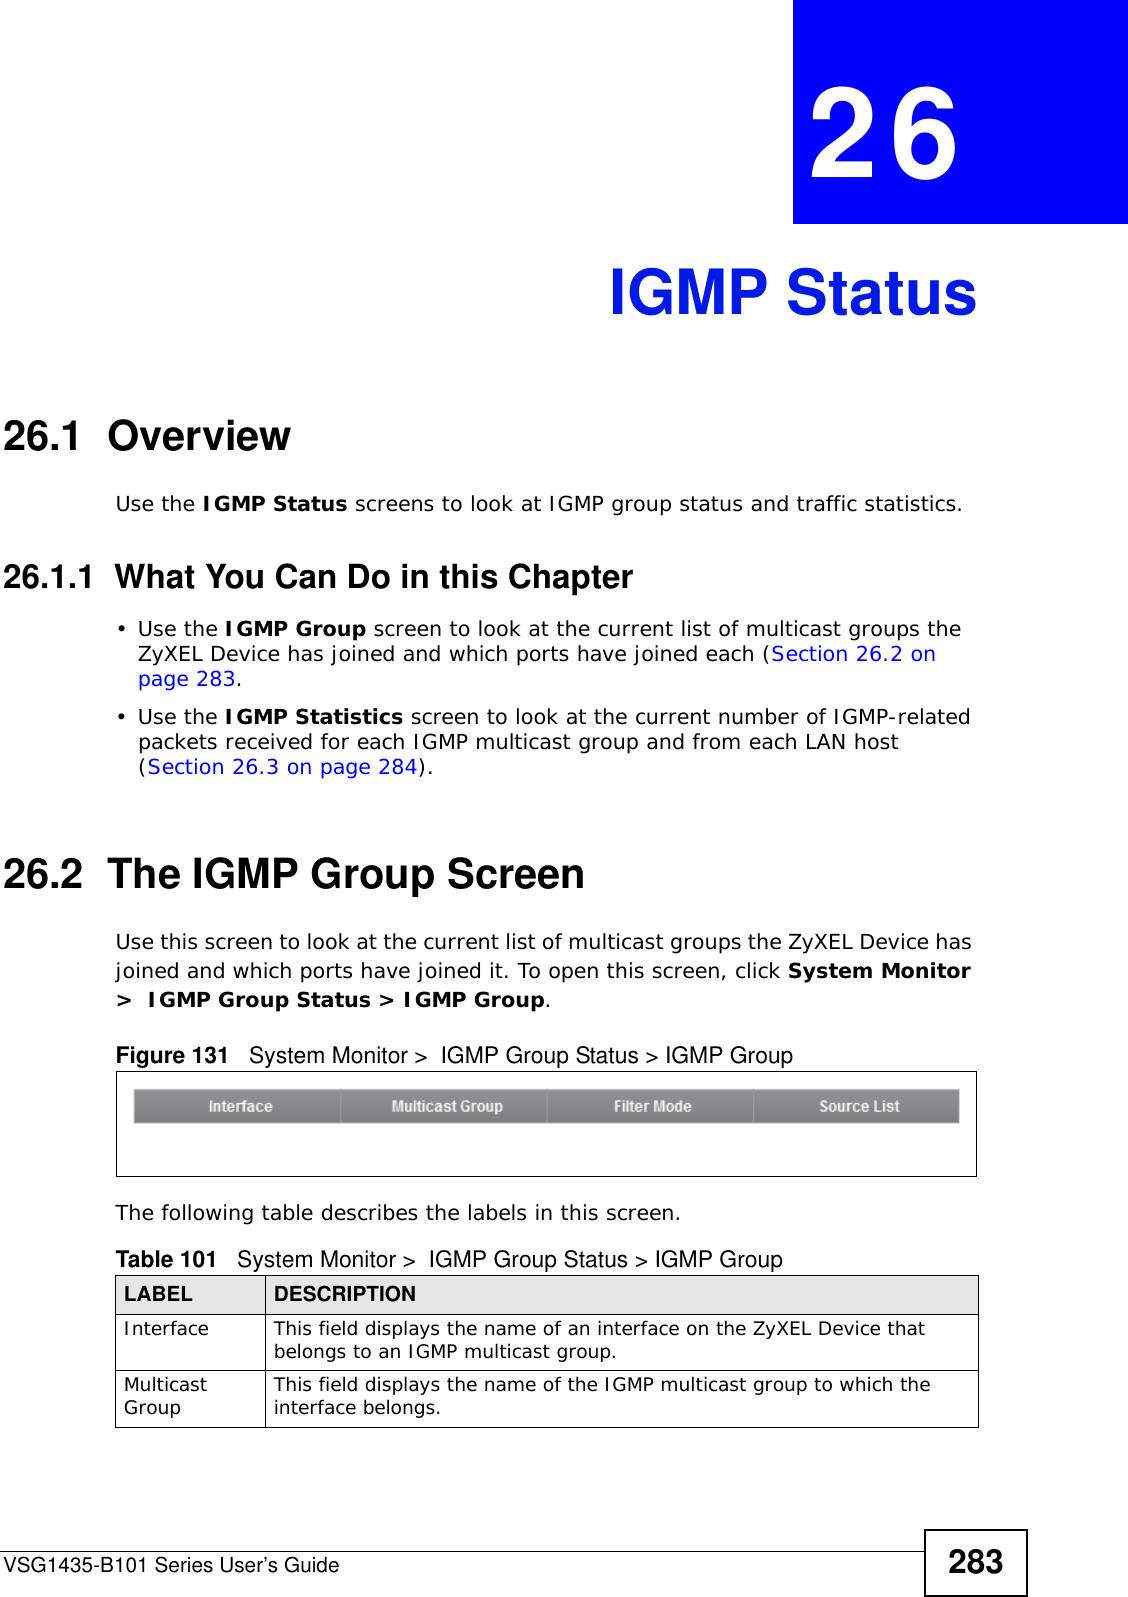 VSG1435-B101 Series User’s Guide 283CHAPTER  26 IGMP Status26.1  OverviewUse the IGMP Status screens to look at IGMP group status and traffic statistics. 26.1.1  What You Can Do in this Chapter•Use the IGMP Group screen to look at the current list of multicast groups the ZyXEL Device has joined and which ports have joined each (Section 26.2 on page 283.•Use the IGMP Statistics screen to look at the current number of IGMP-related packets received for each IGMP multicast group and from each LAN host (Section 26.3 on page 284).26.2  The IGMP Group ScreenUse this screen to look at the current list of multicast groups the ZyXEL Device has joined and which ports have joined it. To open this screen, click System Monitor &gt;  IGMP Group Status &gt; IGMP Group.Figure 131   System Monitor &gt;  IGMP Group Status &gt; IGMP GroupThe following table describes the labels in this screen.Table 101   System Monitor &gt;  IGMP Group Status &gt; IGMP GroupLABEL DESCRIPTIONInterface This field displays the name of an interface on the ZyXEL Device that belongs to an IGMP multicast group. Multicast Group This field displays the name of the IGMP multicast group to which the interface belongs. 